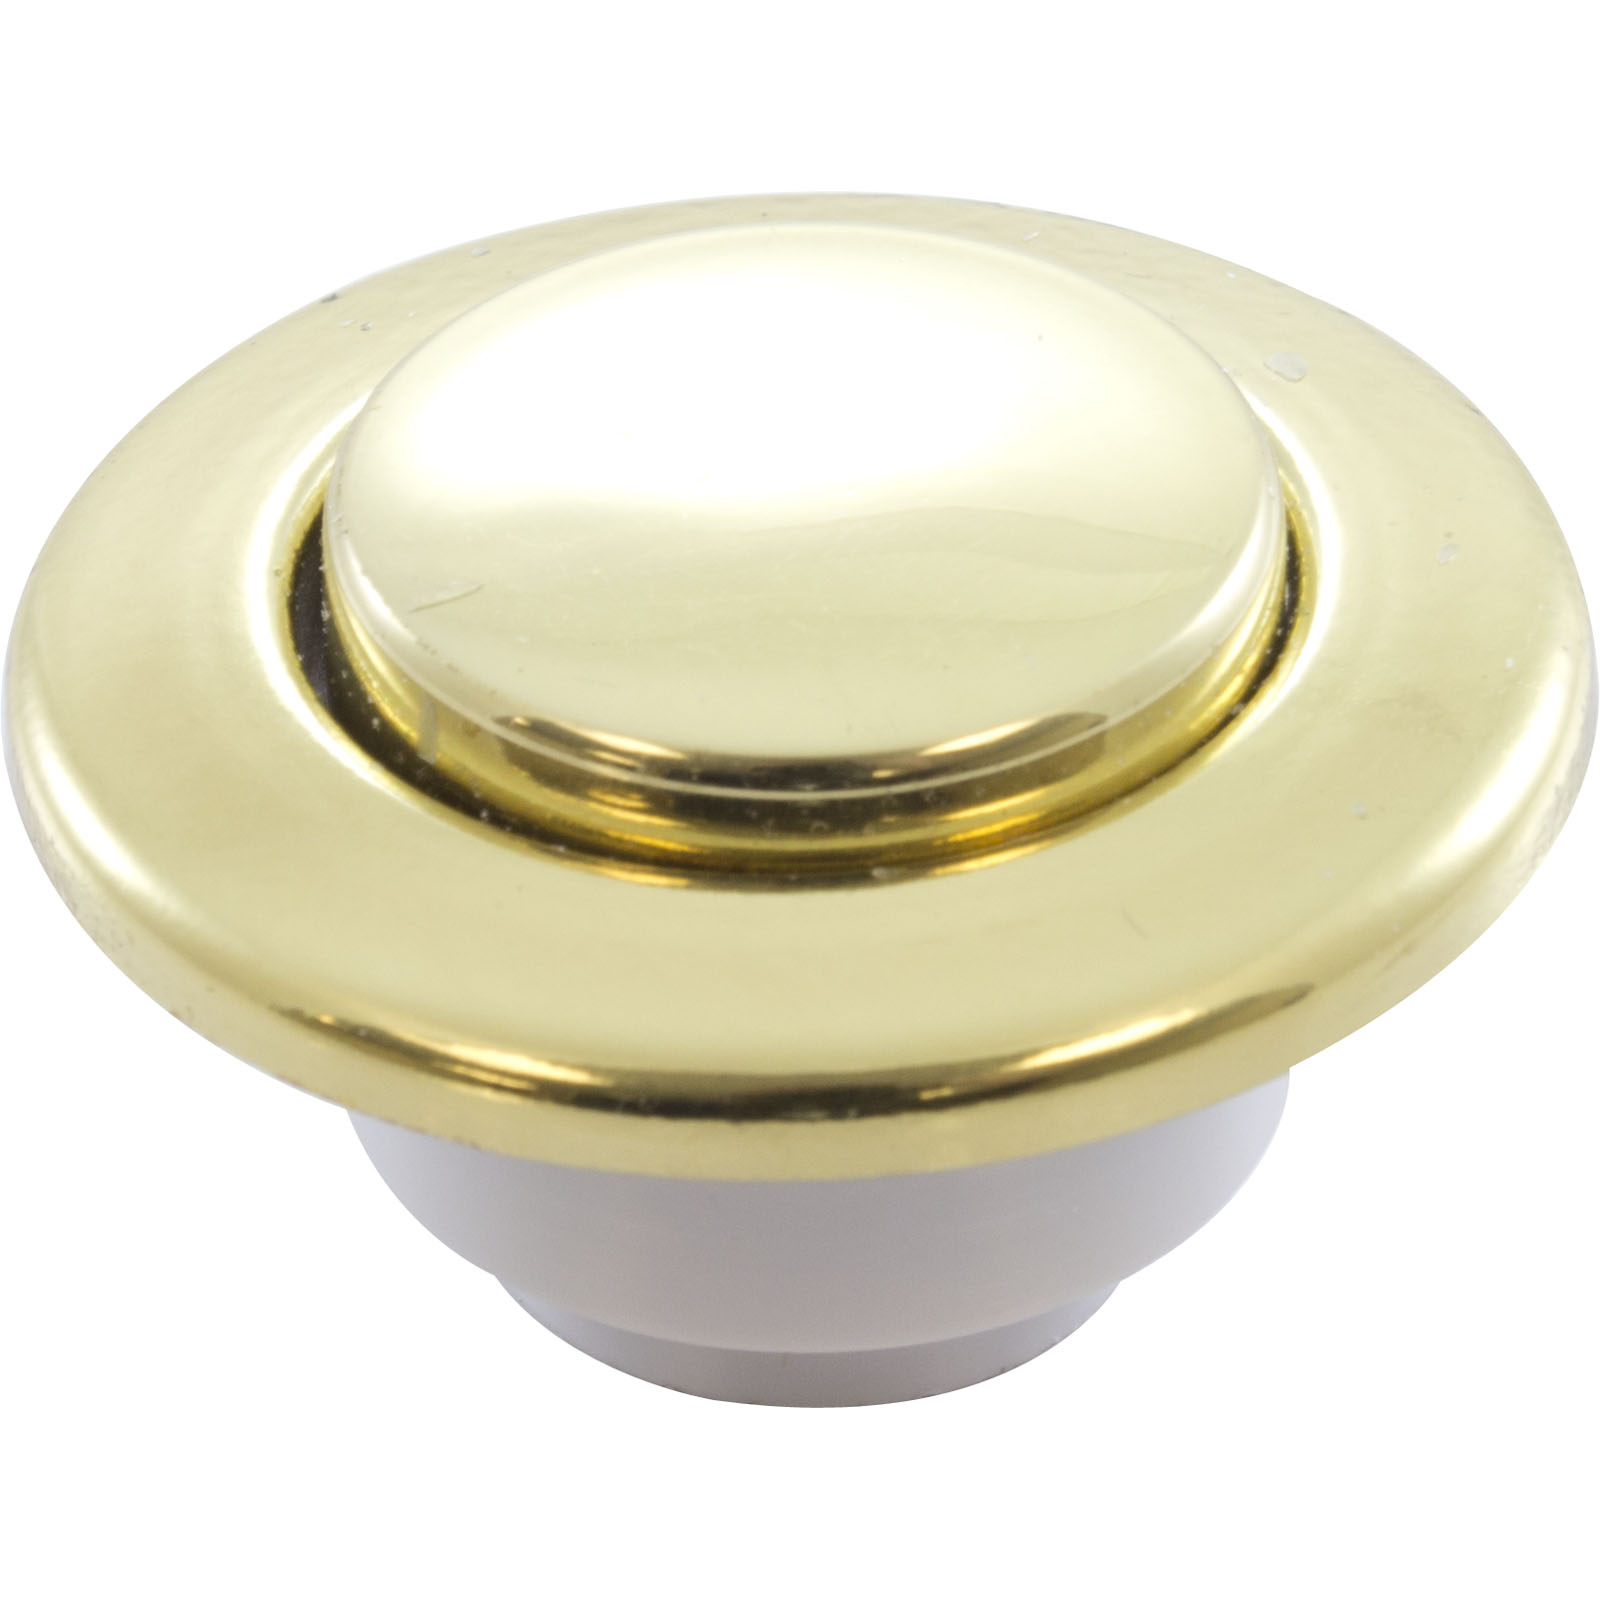 Picture of 18030-PB Trim Kit Balboa Water Group/GG Polished Brass